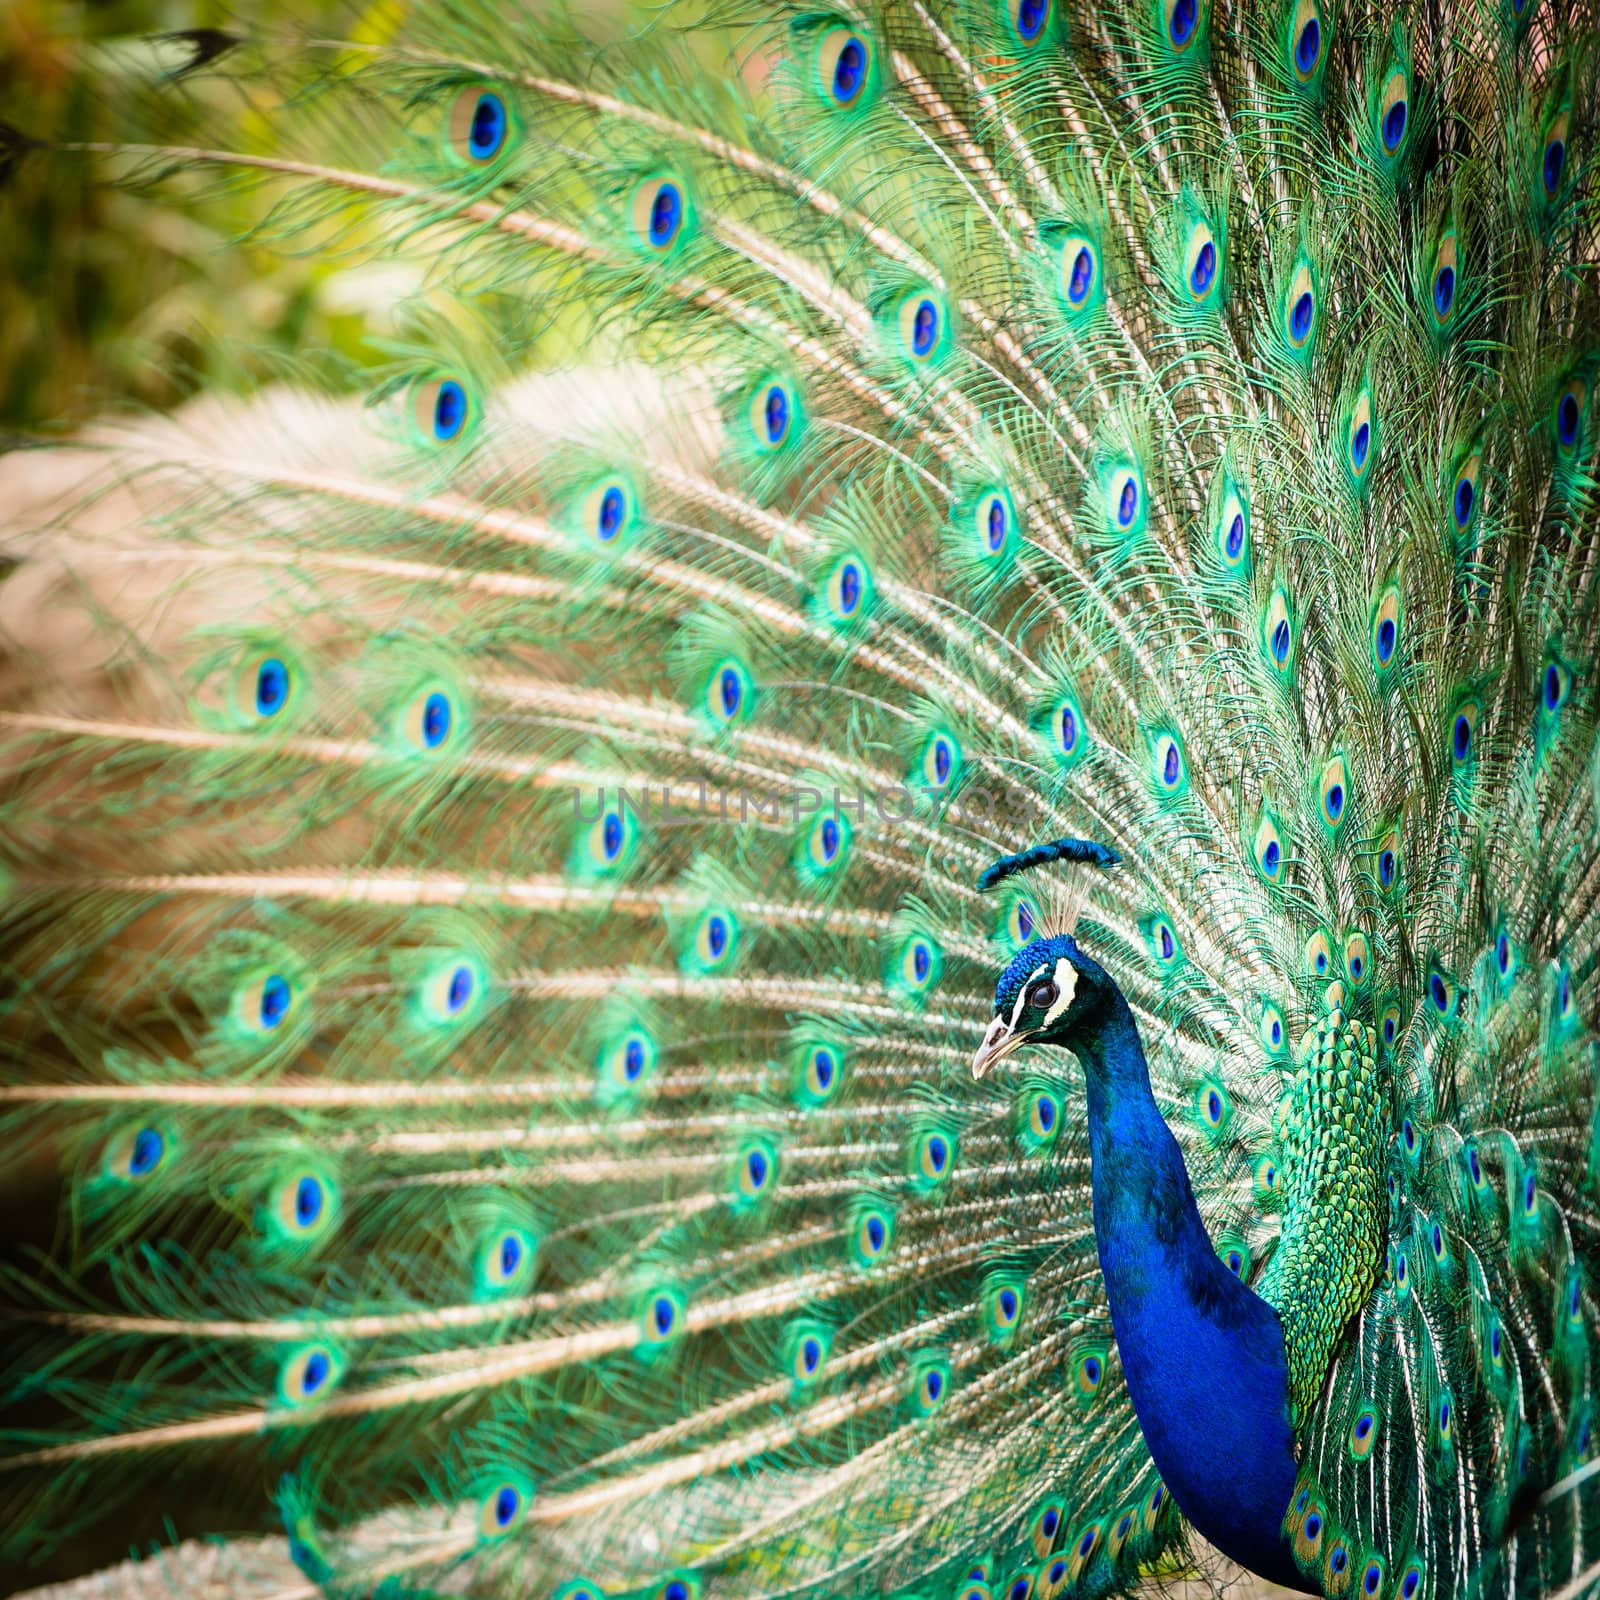 Splendid peacock with feathers out by viktor_cap